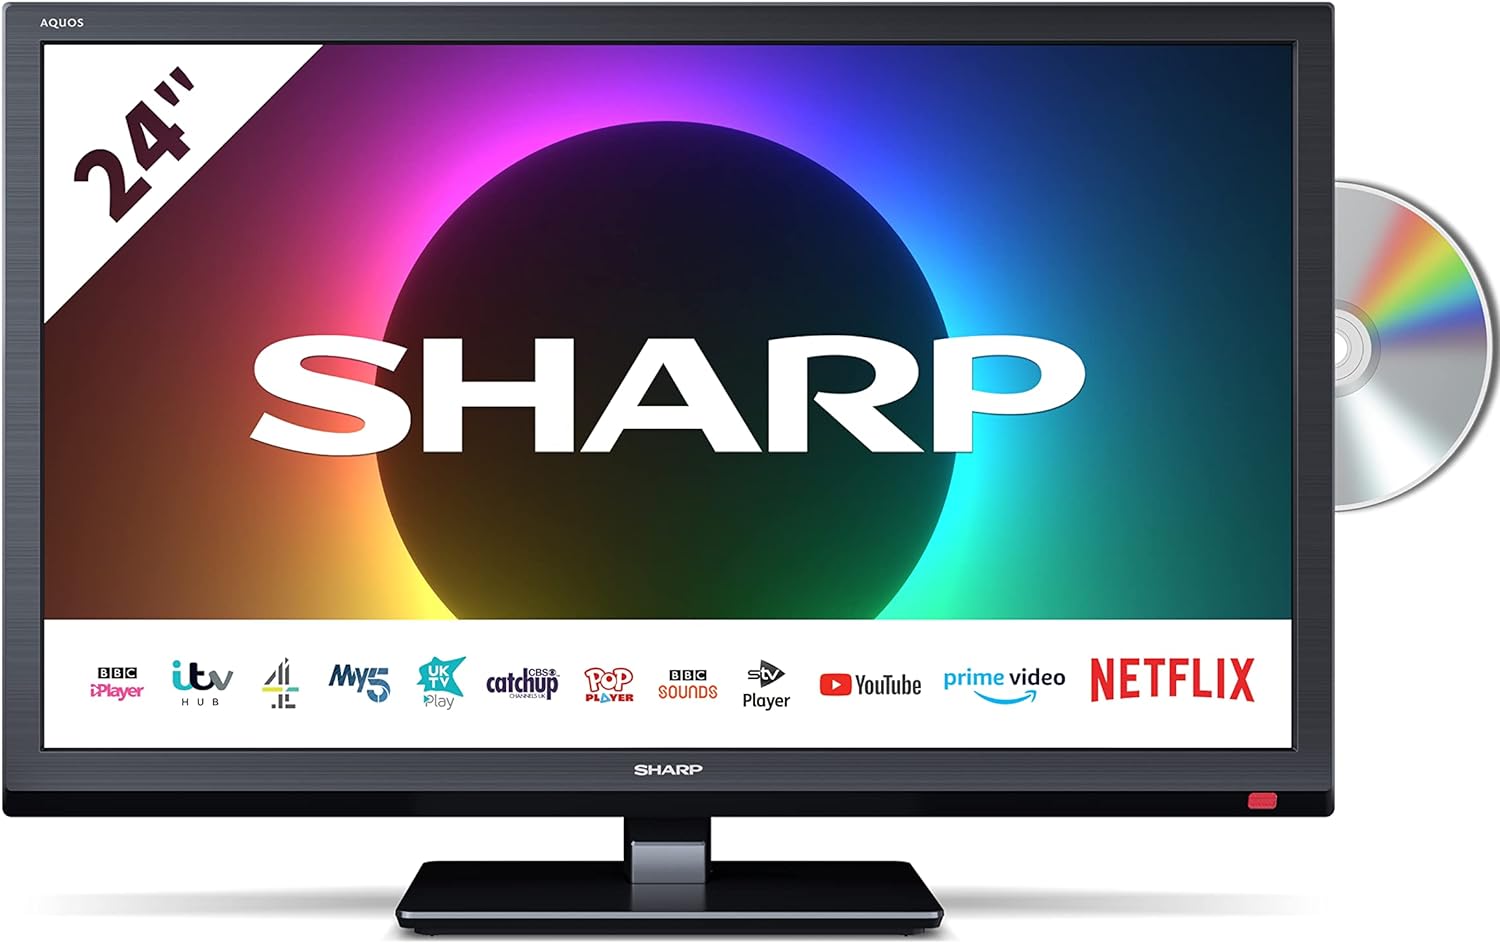 SHARP 32EE6K 32 - Inch HD Ready Smart LED TV in Black with Active Motion 200, Freeview Play, HARMAN/KARDON® Sound System, Aquos Net+, Pre - Installed Apps, SD Card Reader, 3x HDMI & 2x USB - Amazing Gadgets Outlet